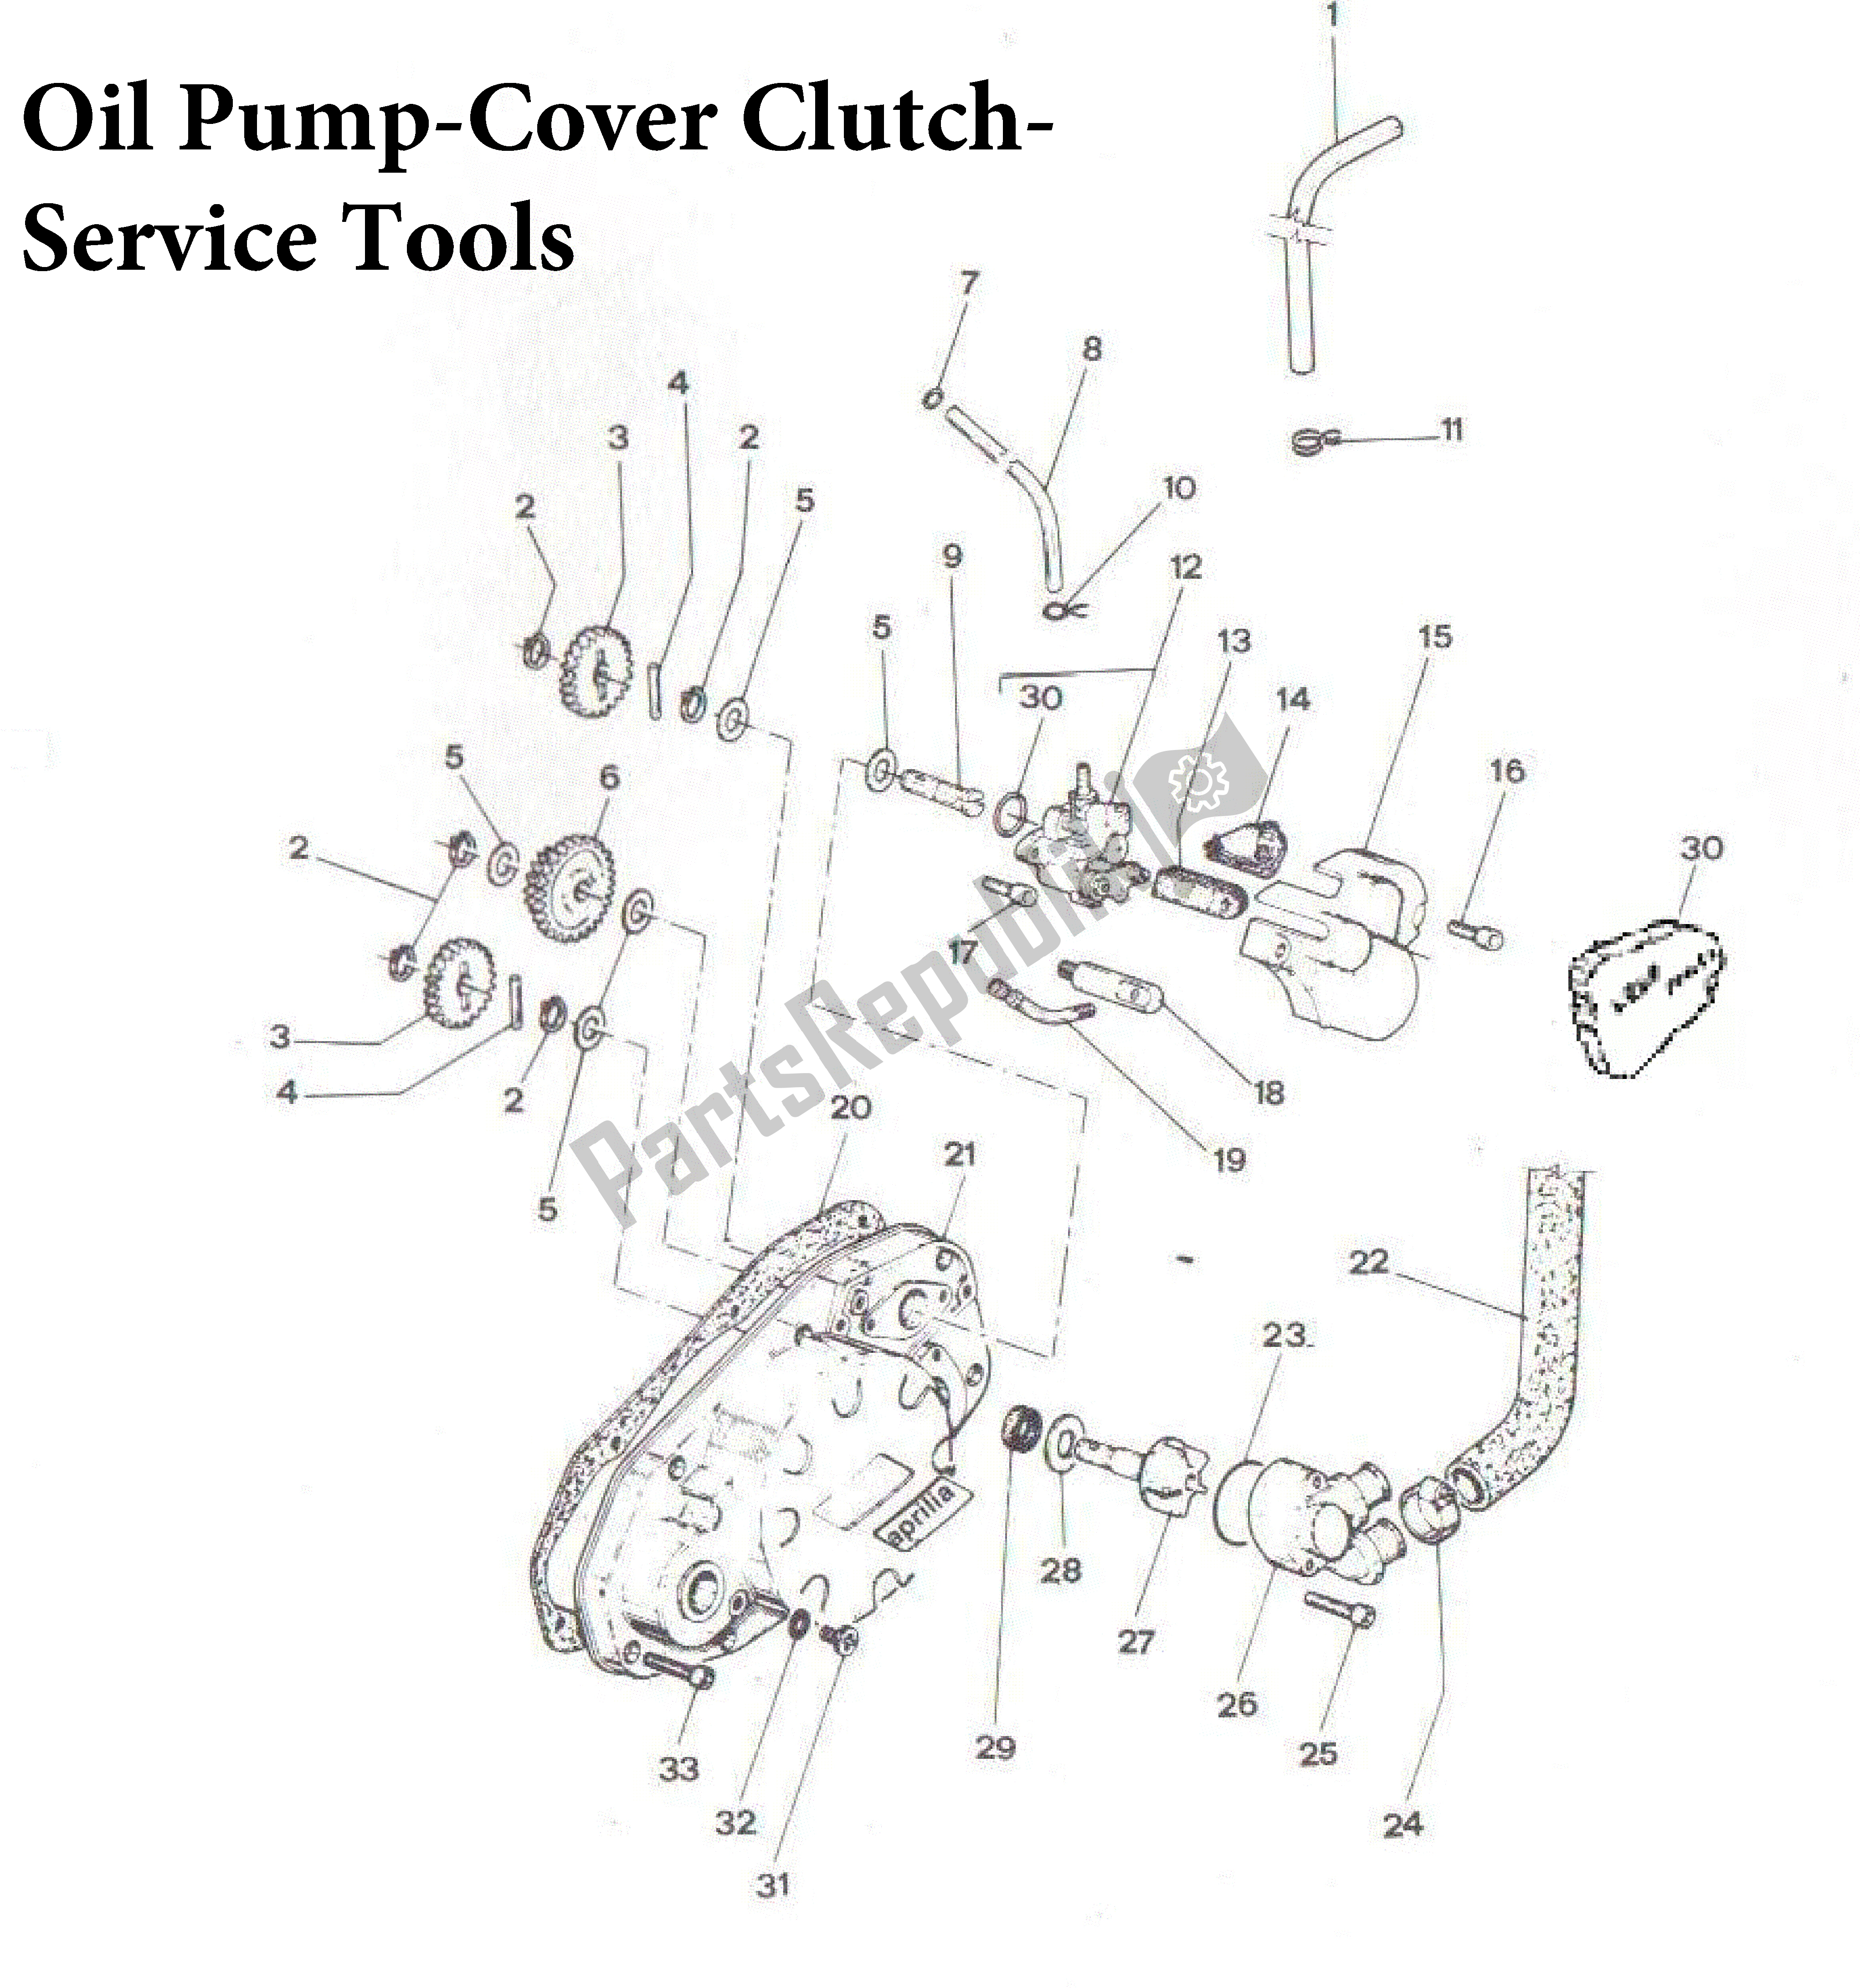 All parts for the Oil Pump-cover Clutch-service Tools of the Aprilia AF1 50 1986 - 1988